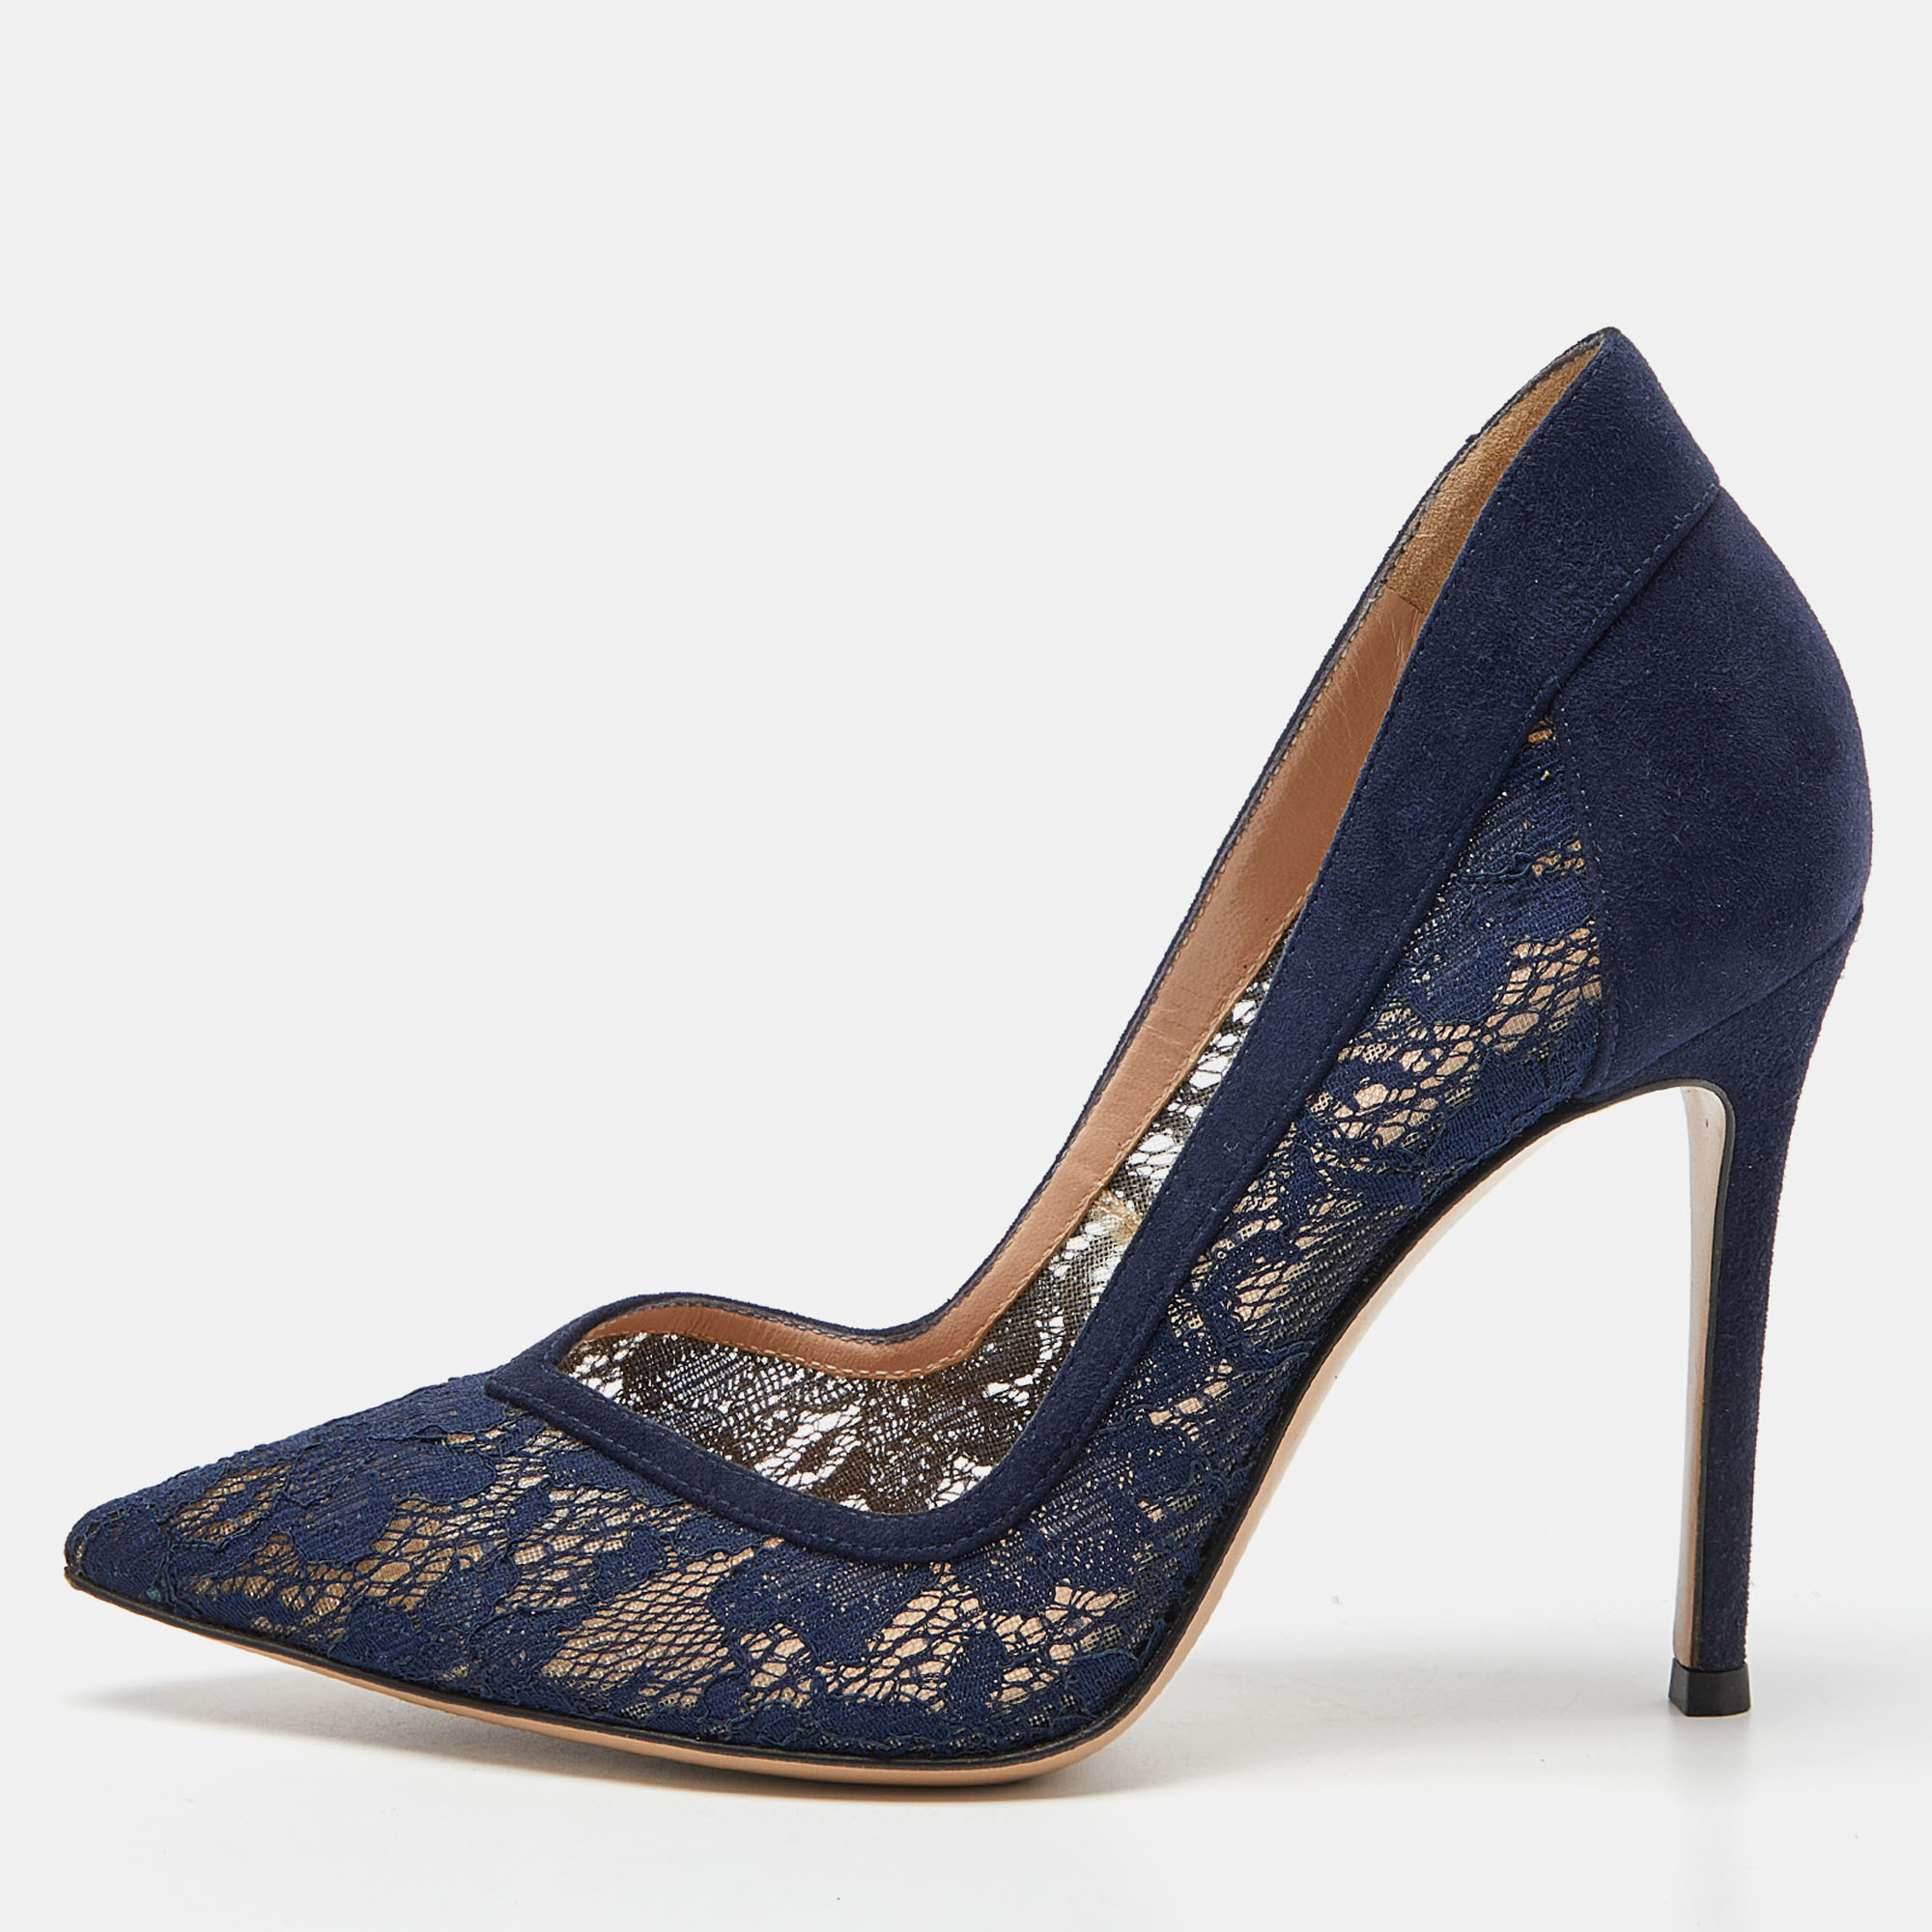 Gianvito Rossi Navy Blue Lace And Suede Pumps Size 36